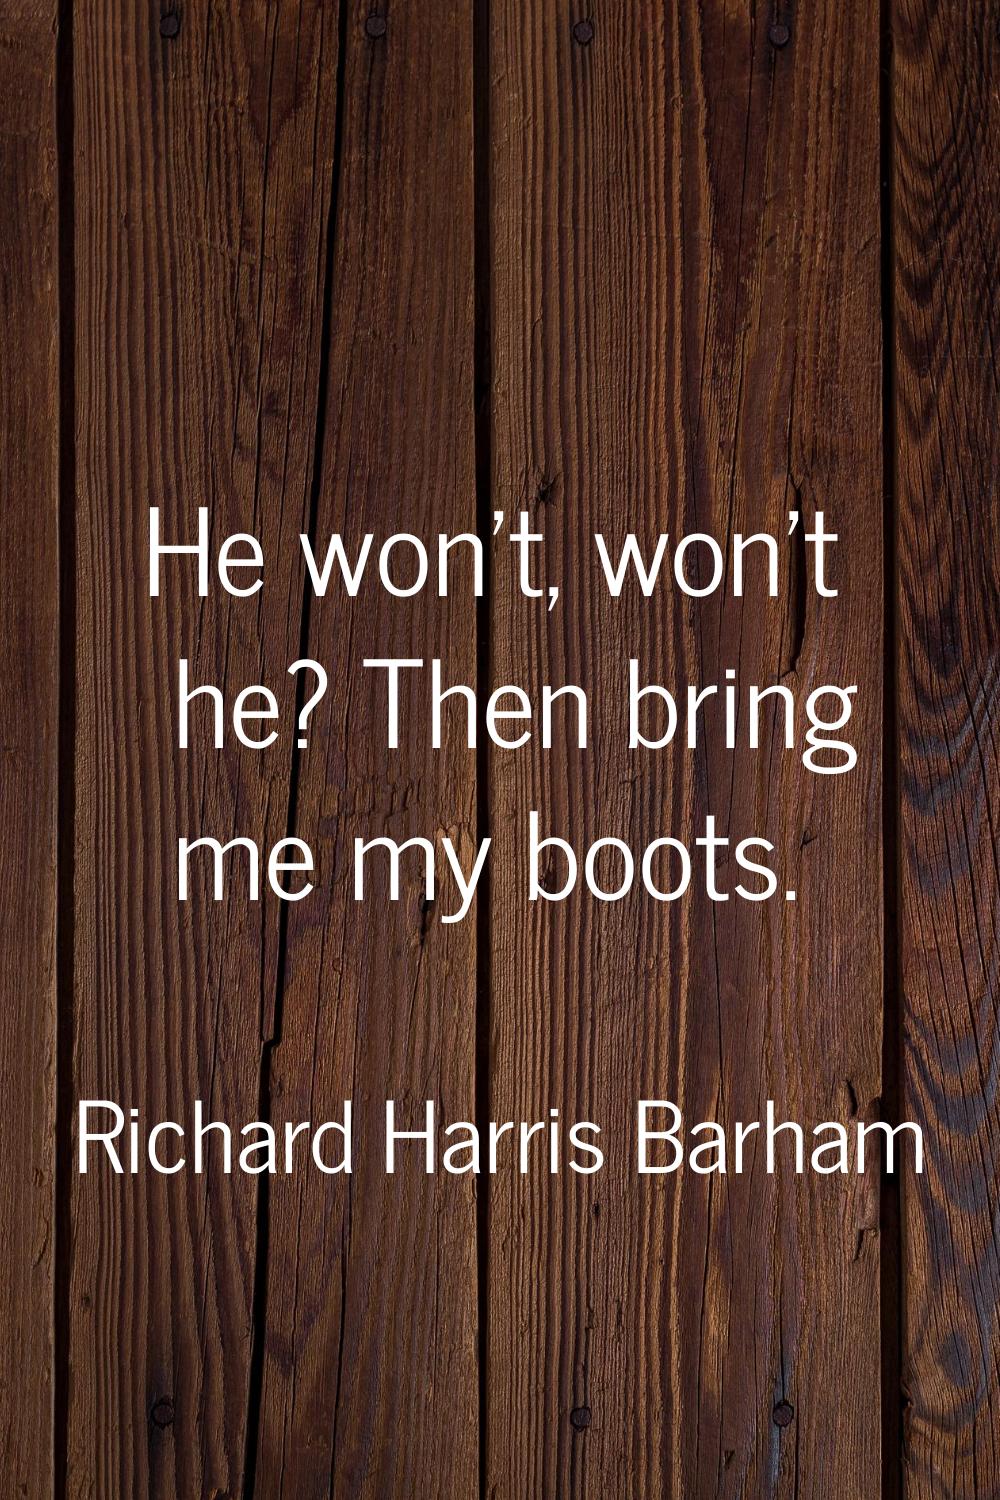 He won't, won't he? Then bring me my boots.